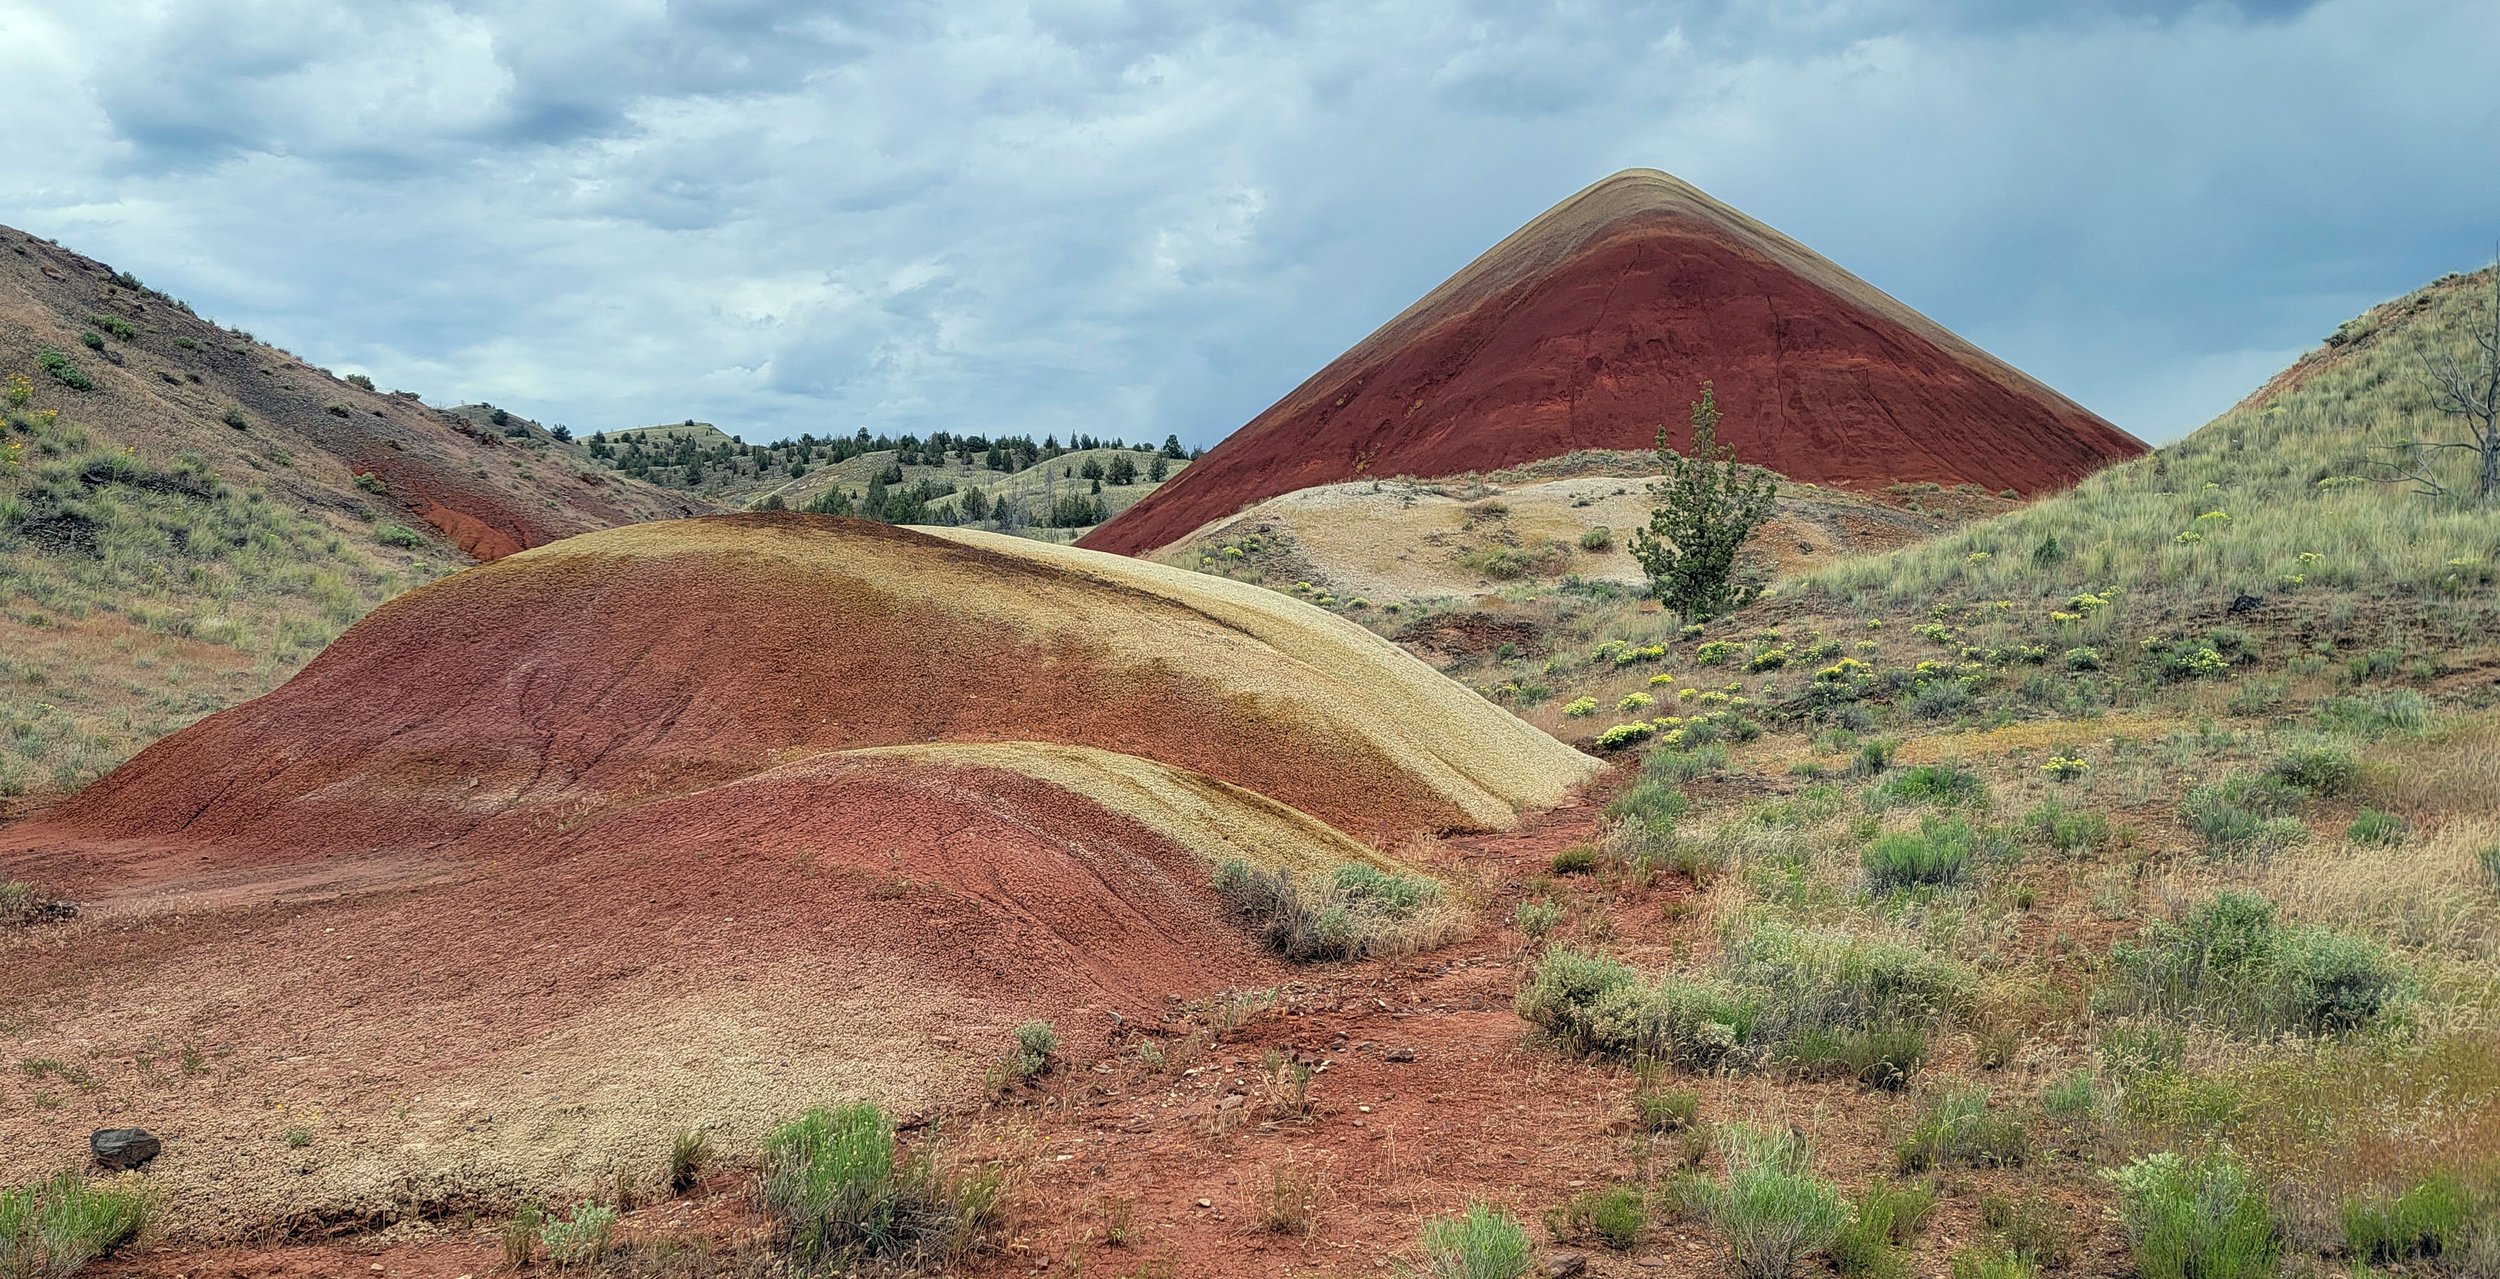  This one is called “Red Hill”. Don’t know why. 